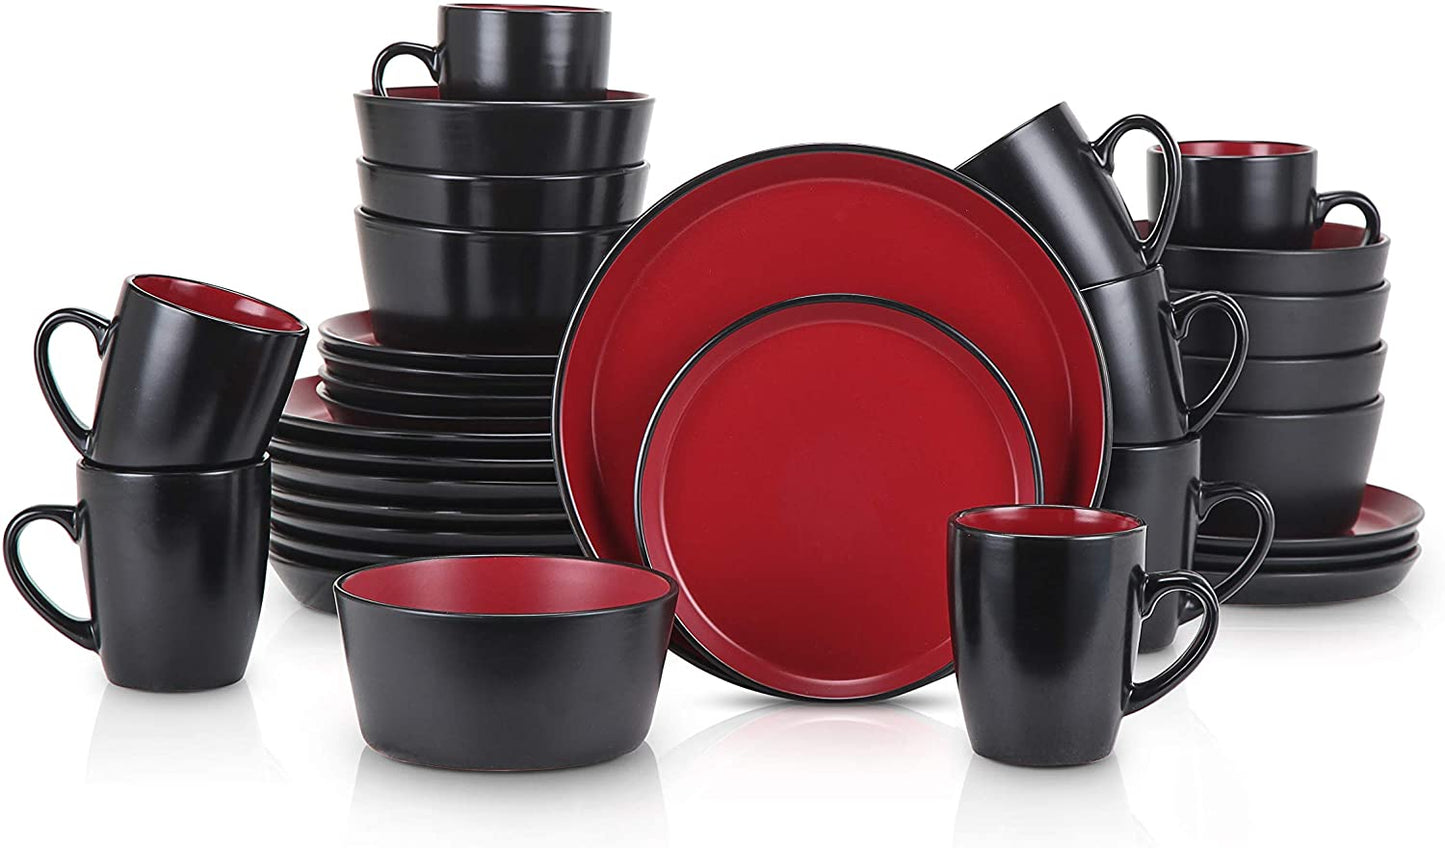 Stone Lain 16 Pieces Two-Tone Color Glaze without Rim Stoneware Round Dinnerware Set, Red and Black